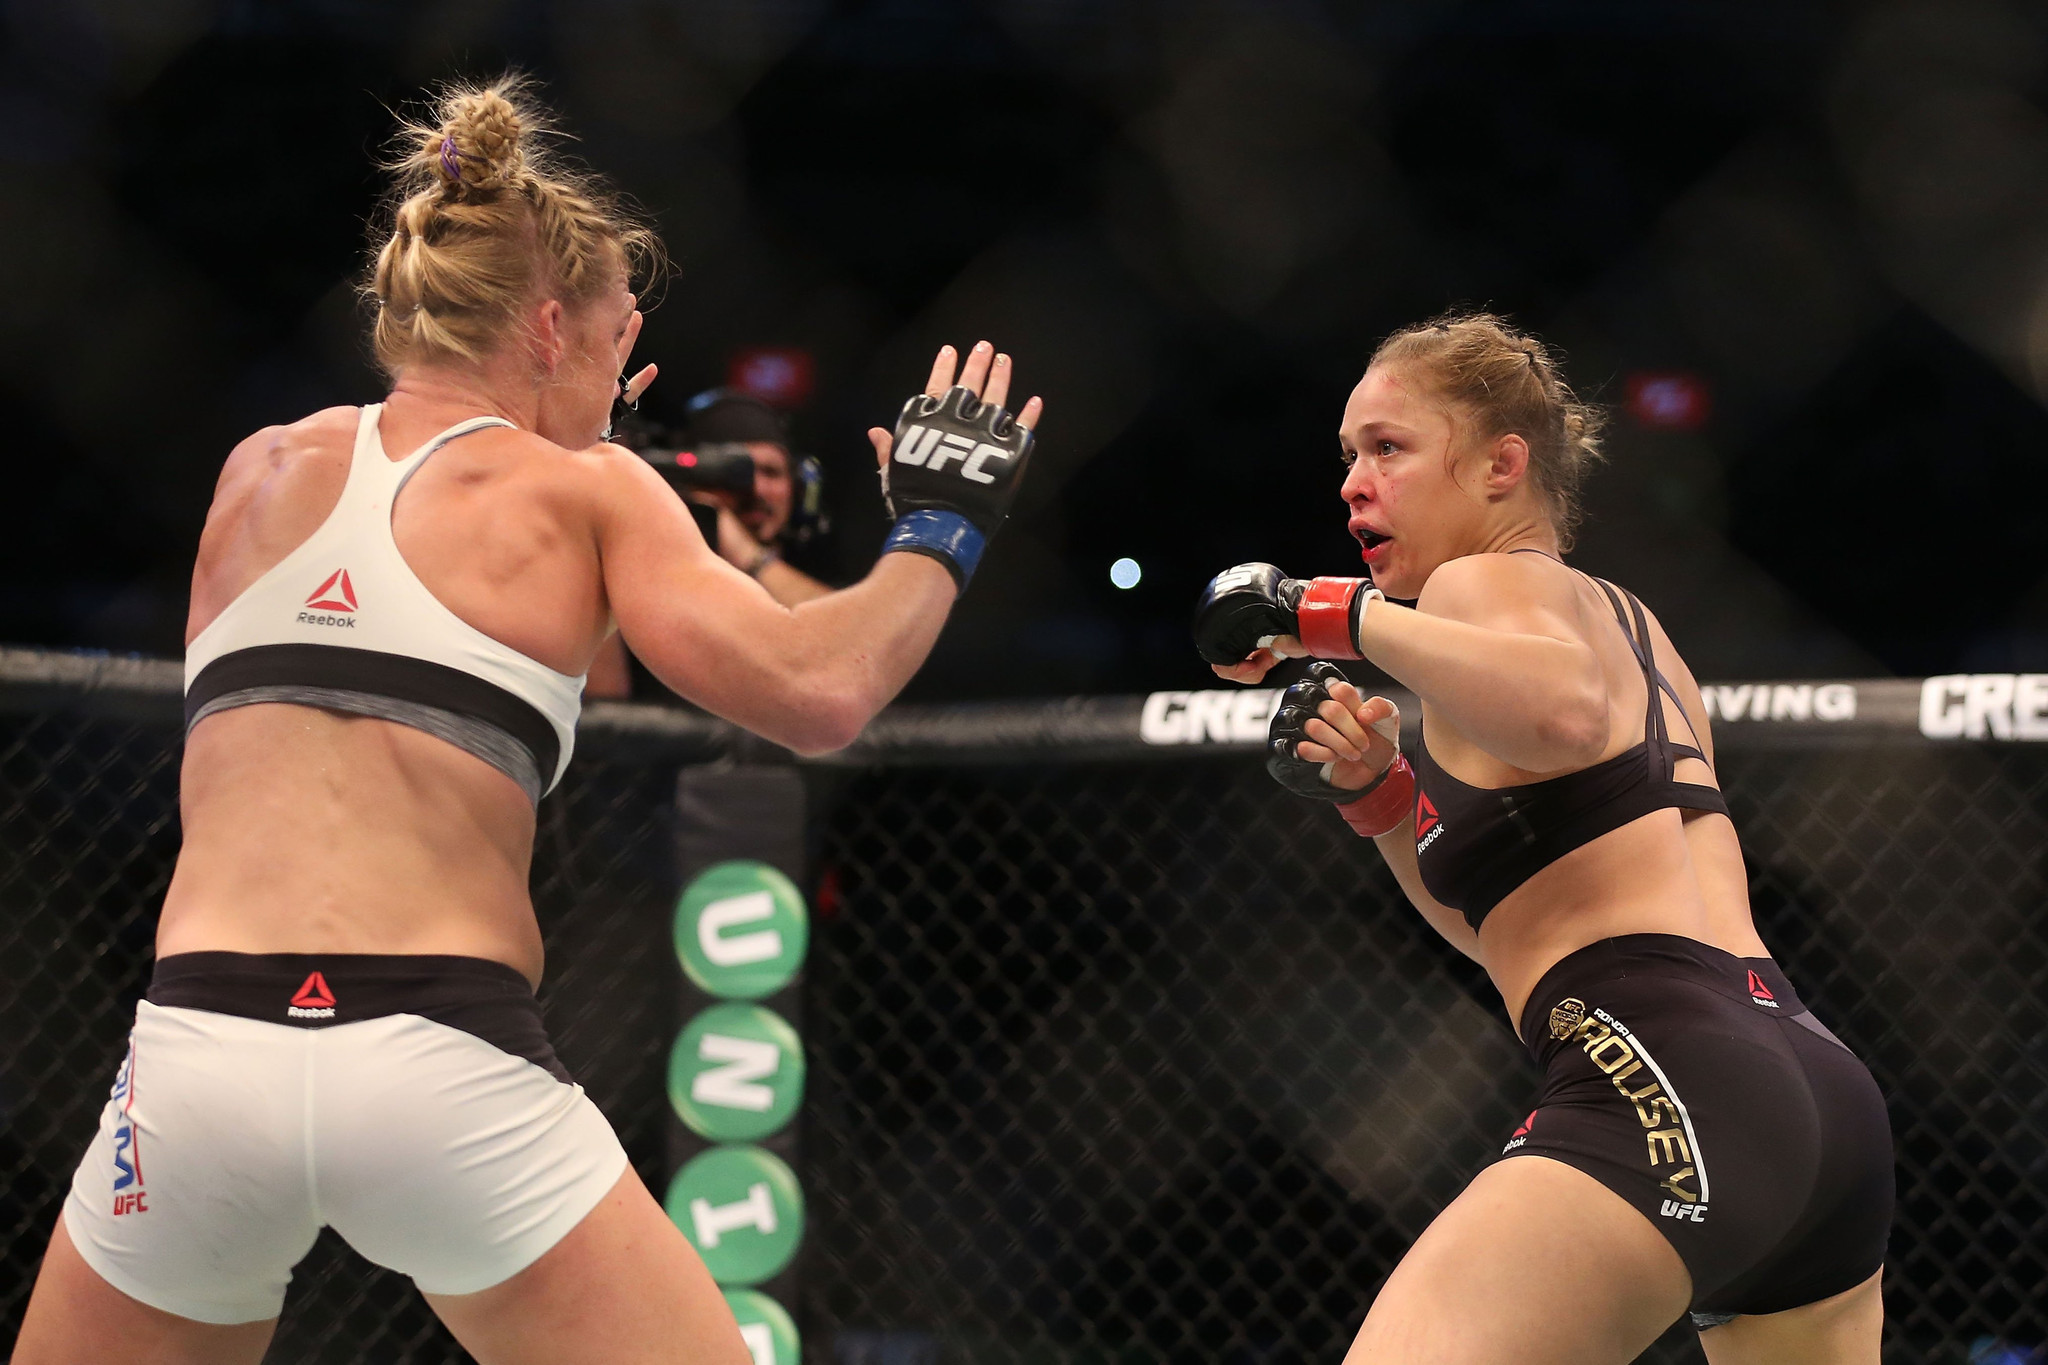 Ronda Rousey has earned right to rematch with Holly Holm, UFC president says - LA Times2048 x 1365